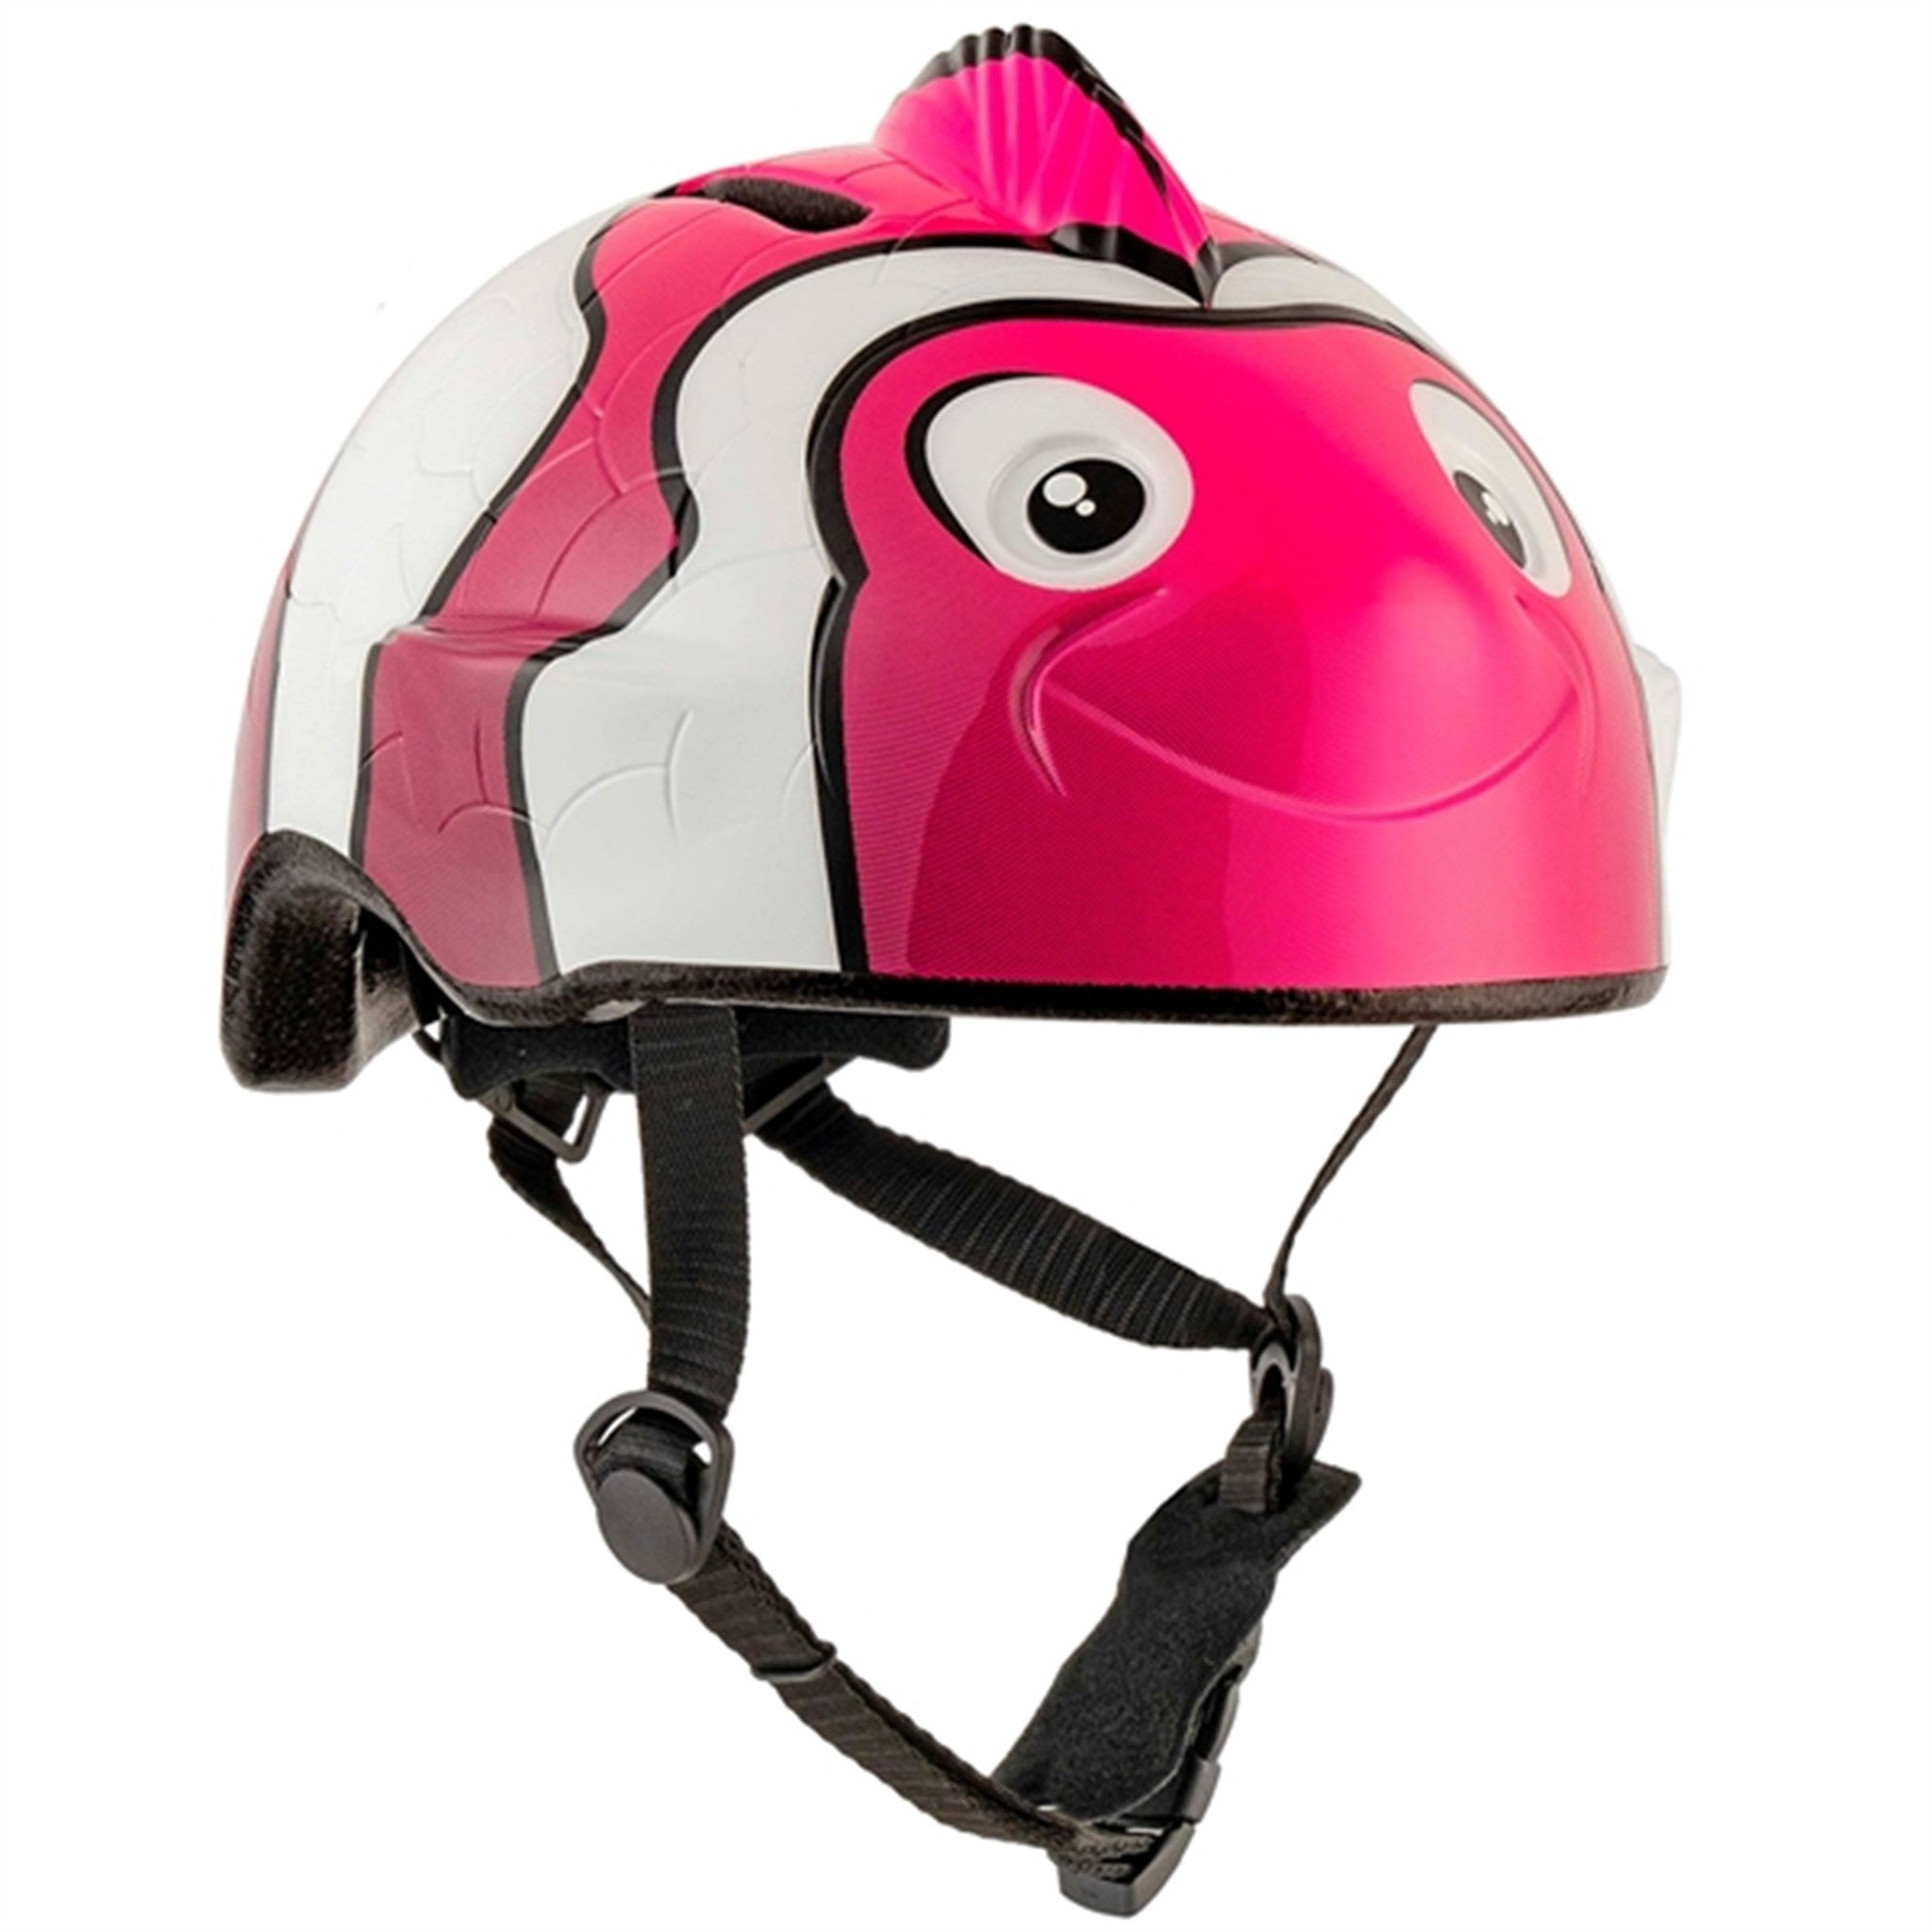 Crazy Safety Fish Bicycle Helmet Pink